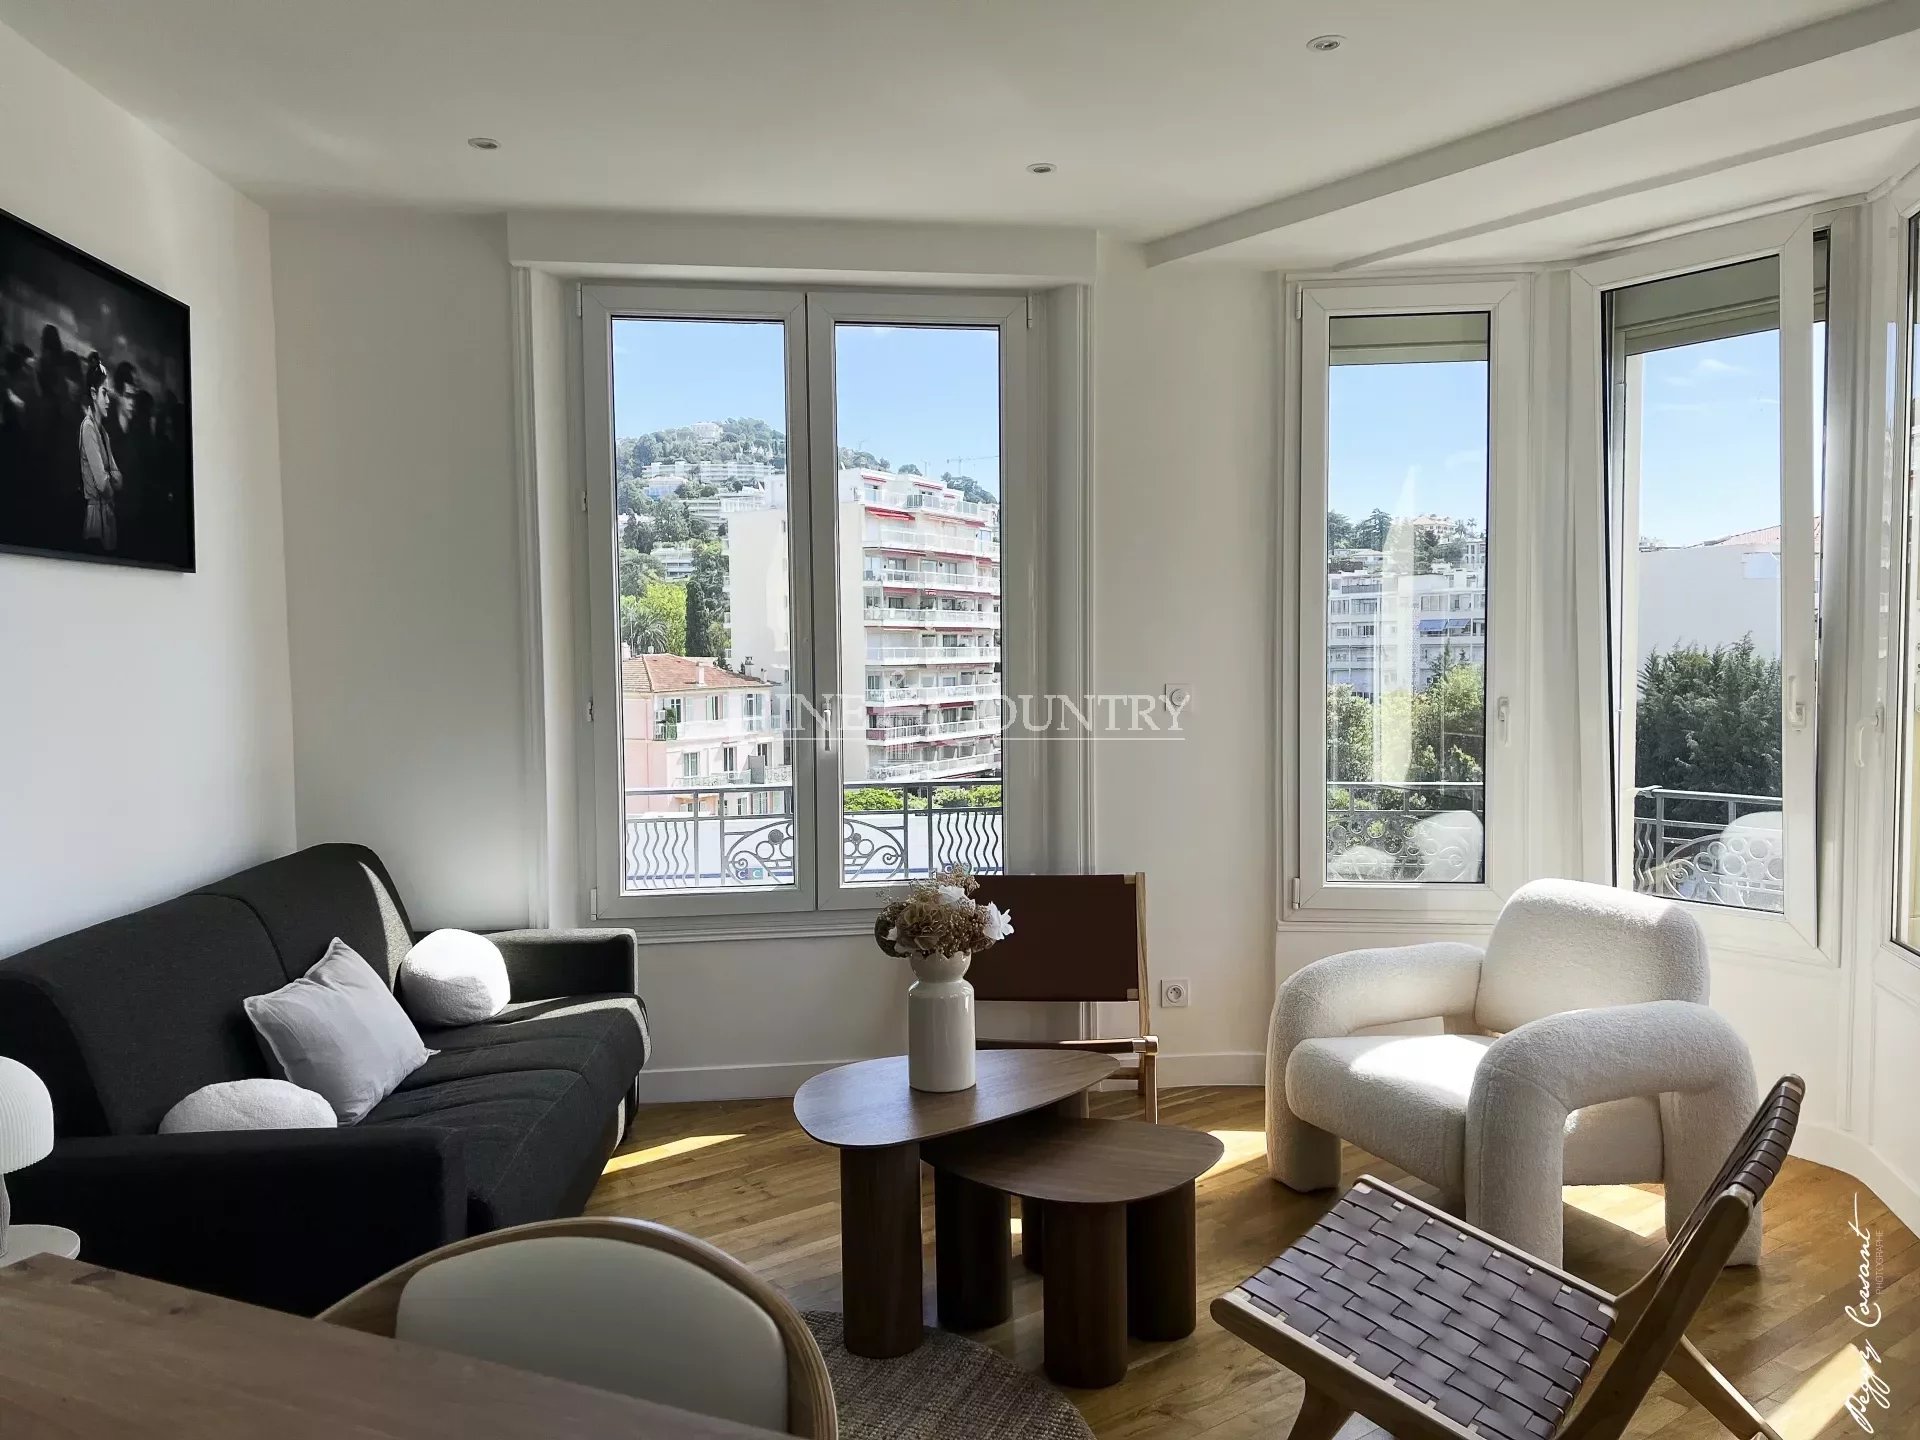 Apartment for sale in Cannes, Banane Accommodation in Cannes